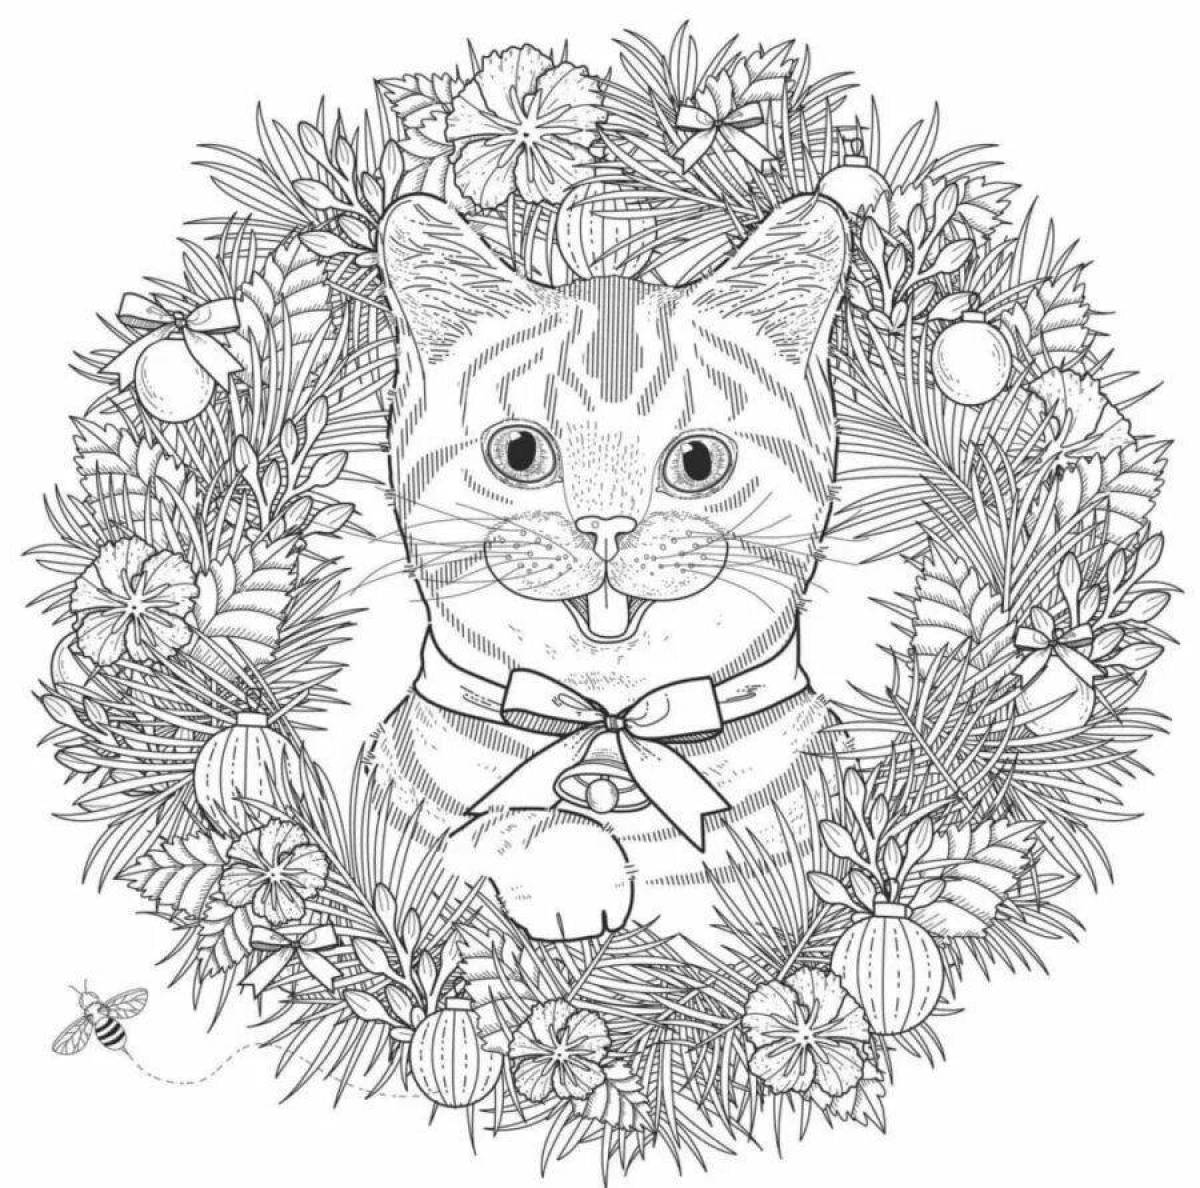 Silly cat in a mug coloring book